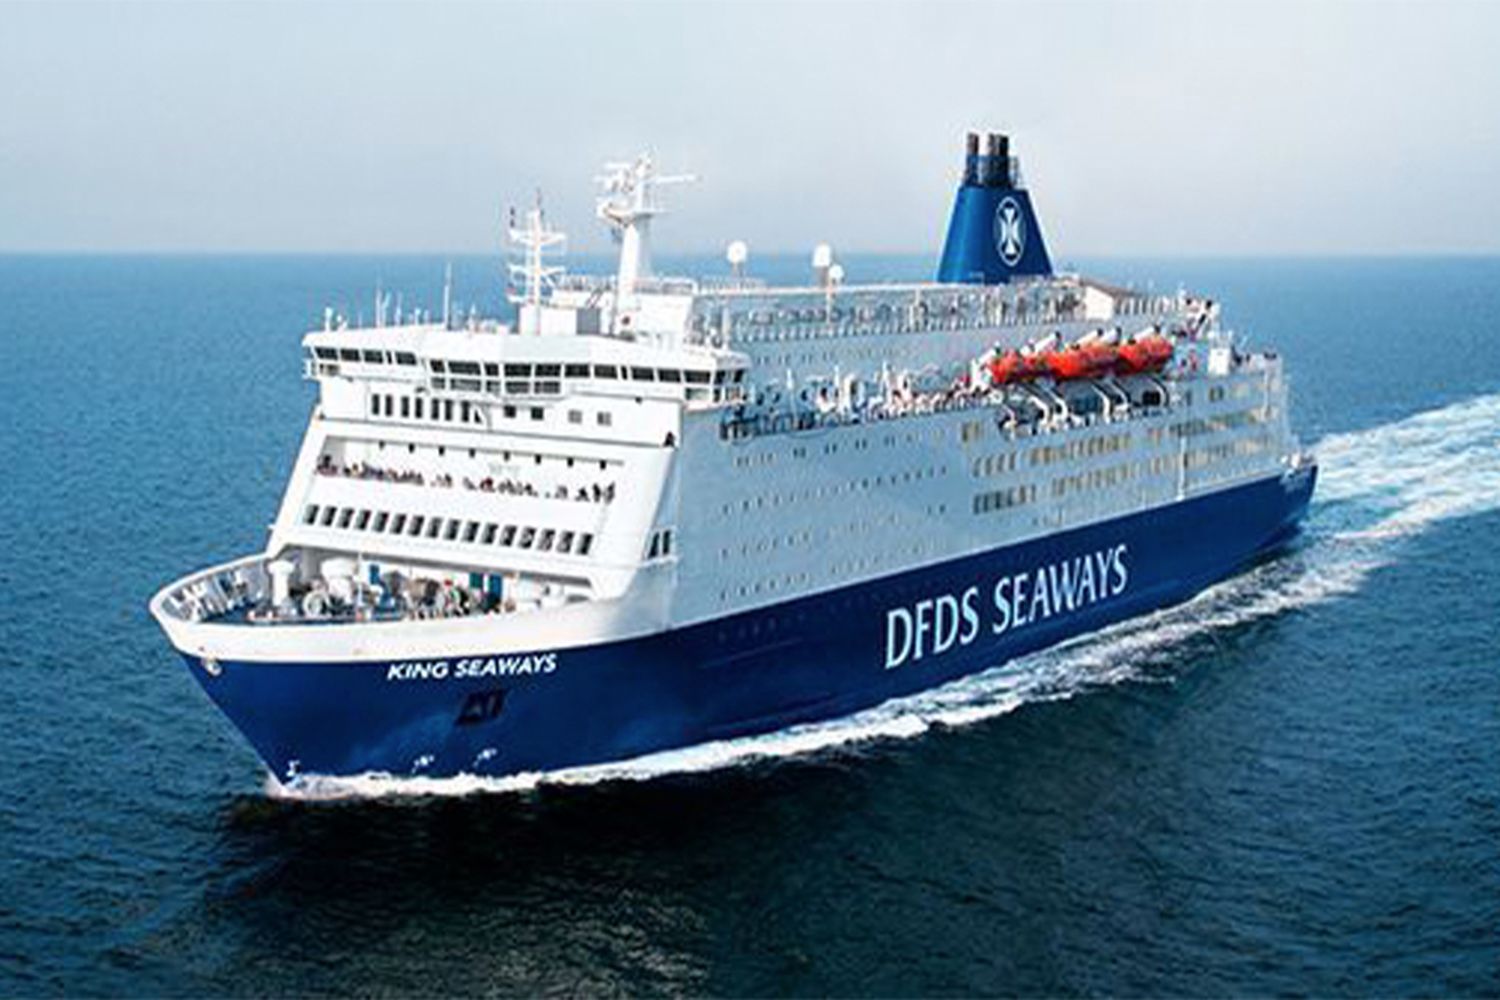 dfds mini cruise from newcastle